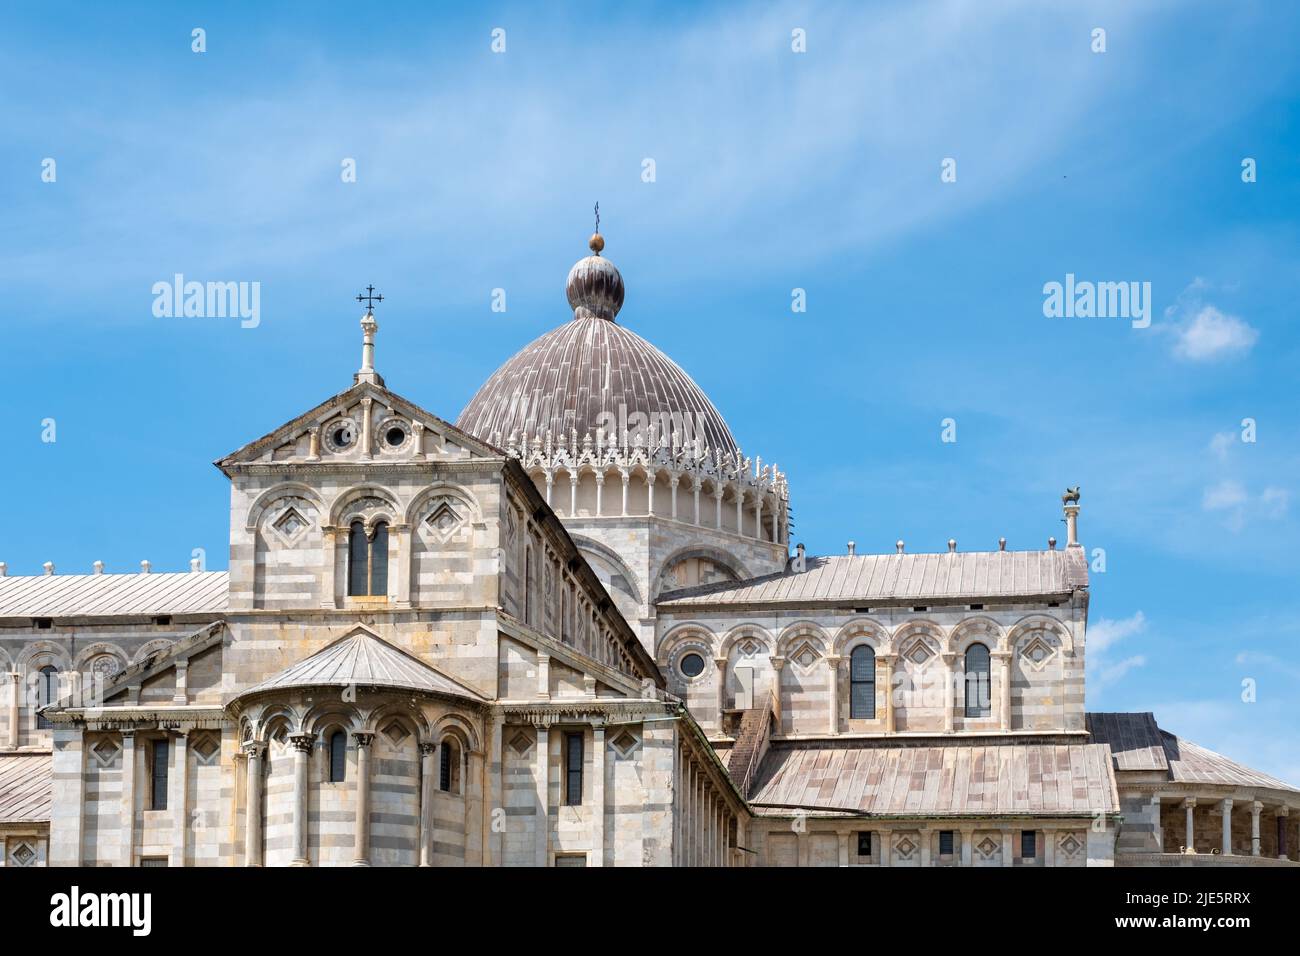 Architectural details of the exterior of the Pisa Cathedral in Pisa, Italy with negative space for copy. Stock Photo